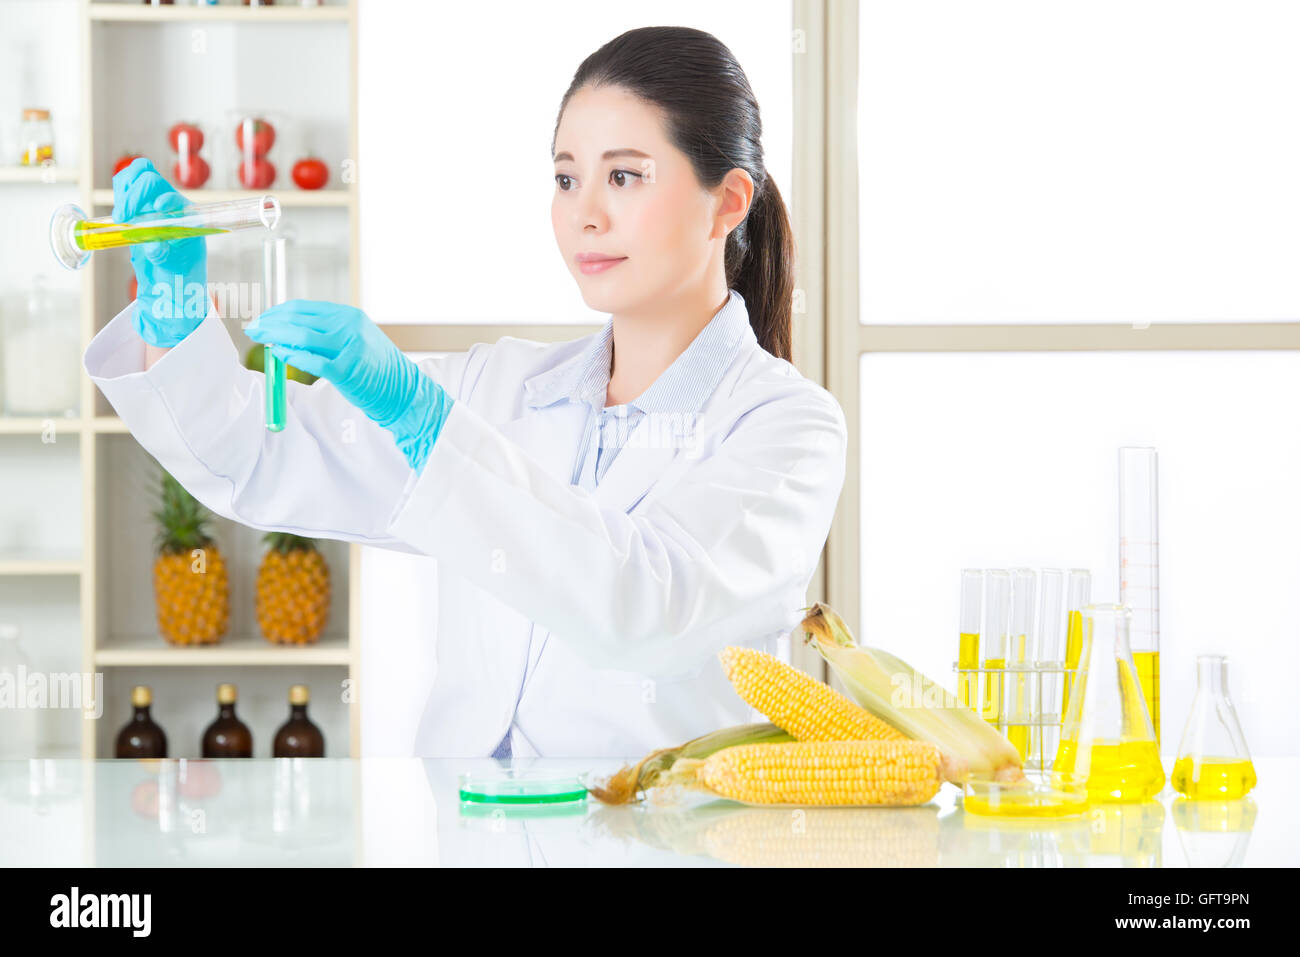 gmo chemistry researchers observing indicator color shift test Stock Photo